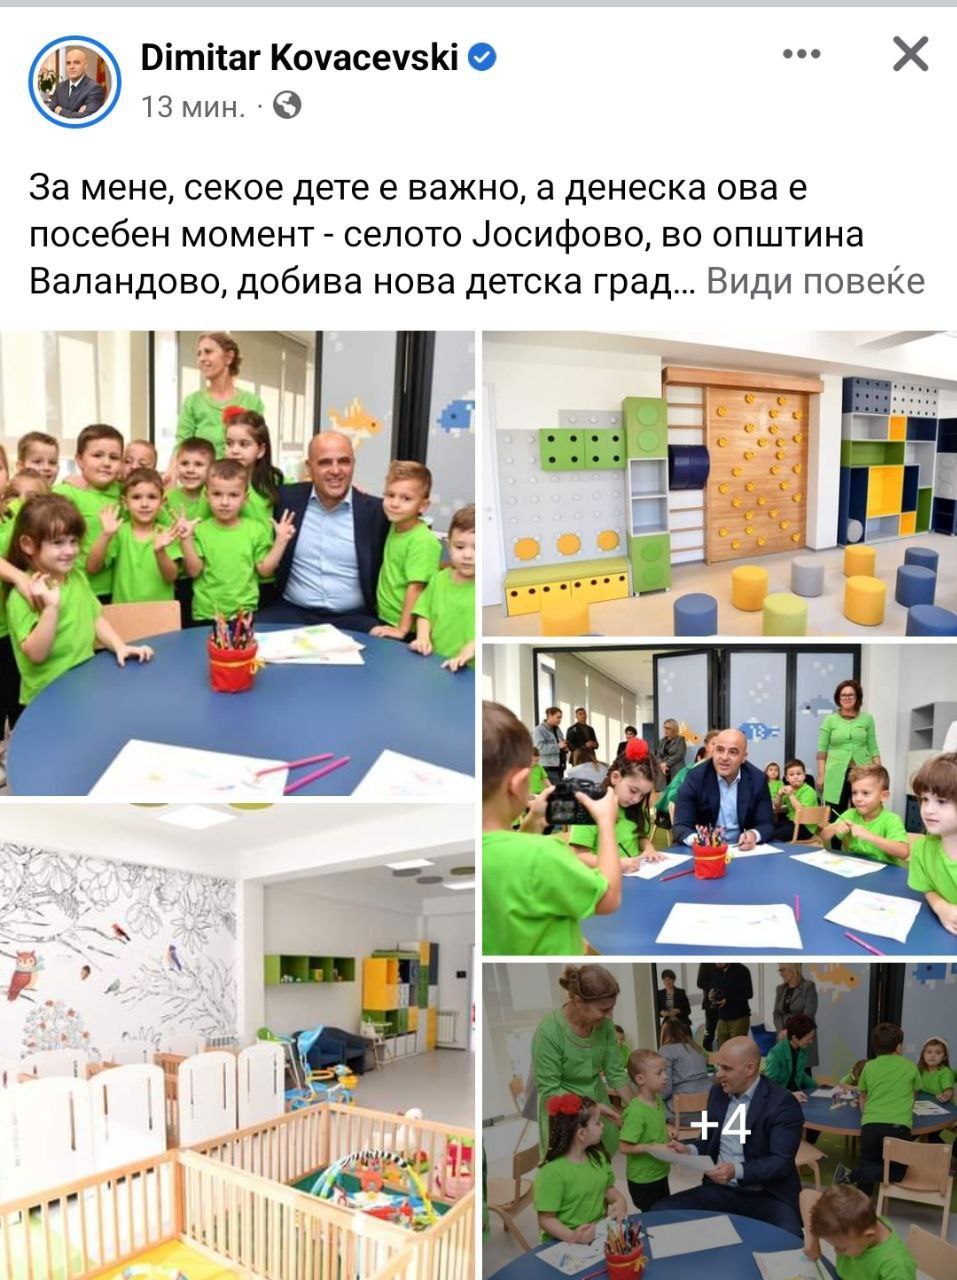 “For me, every child is important…” says the Prime Minister while abusing the children from the “Detelinka” kindergarten in Josifovo for political purposes